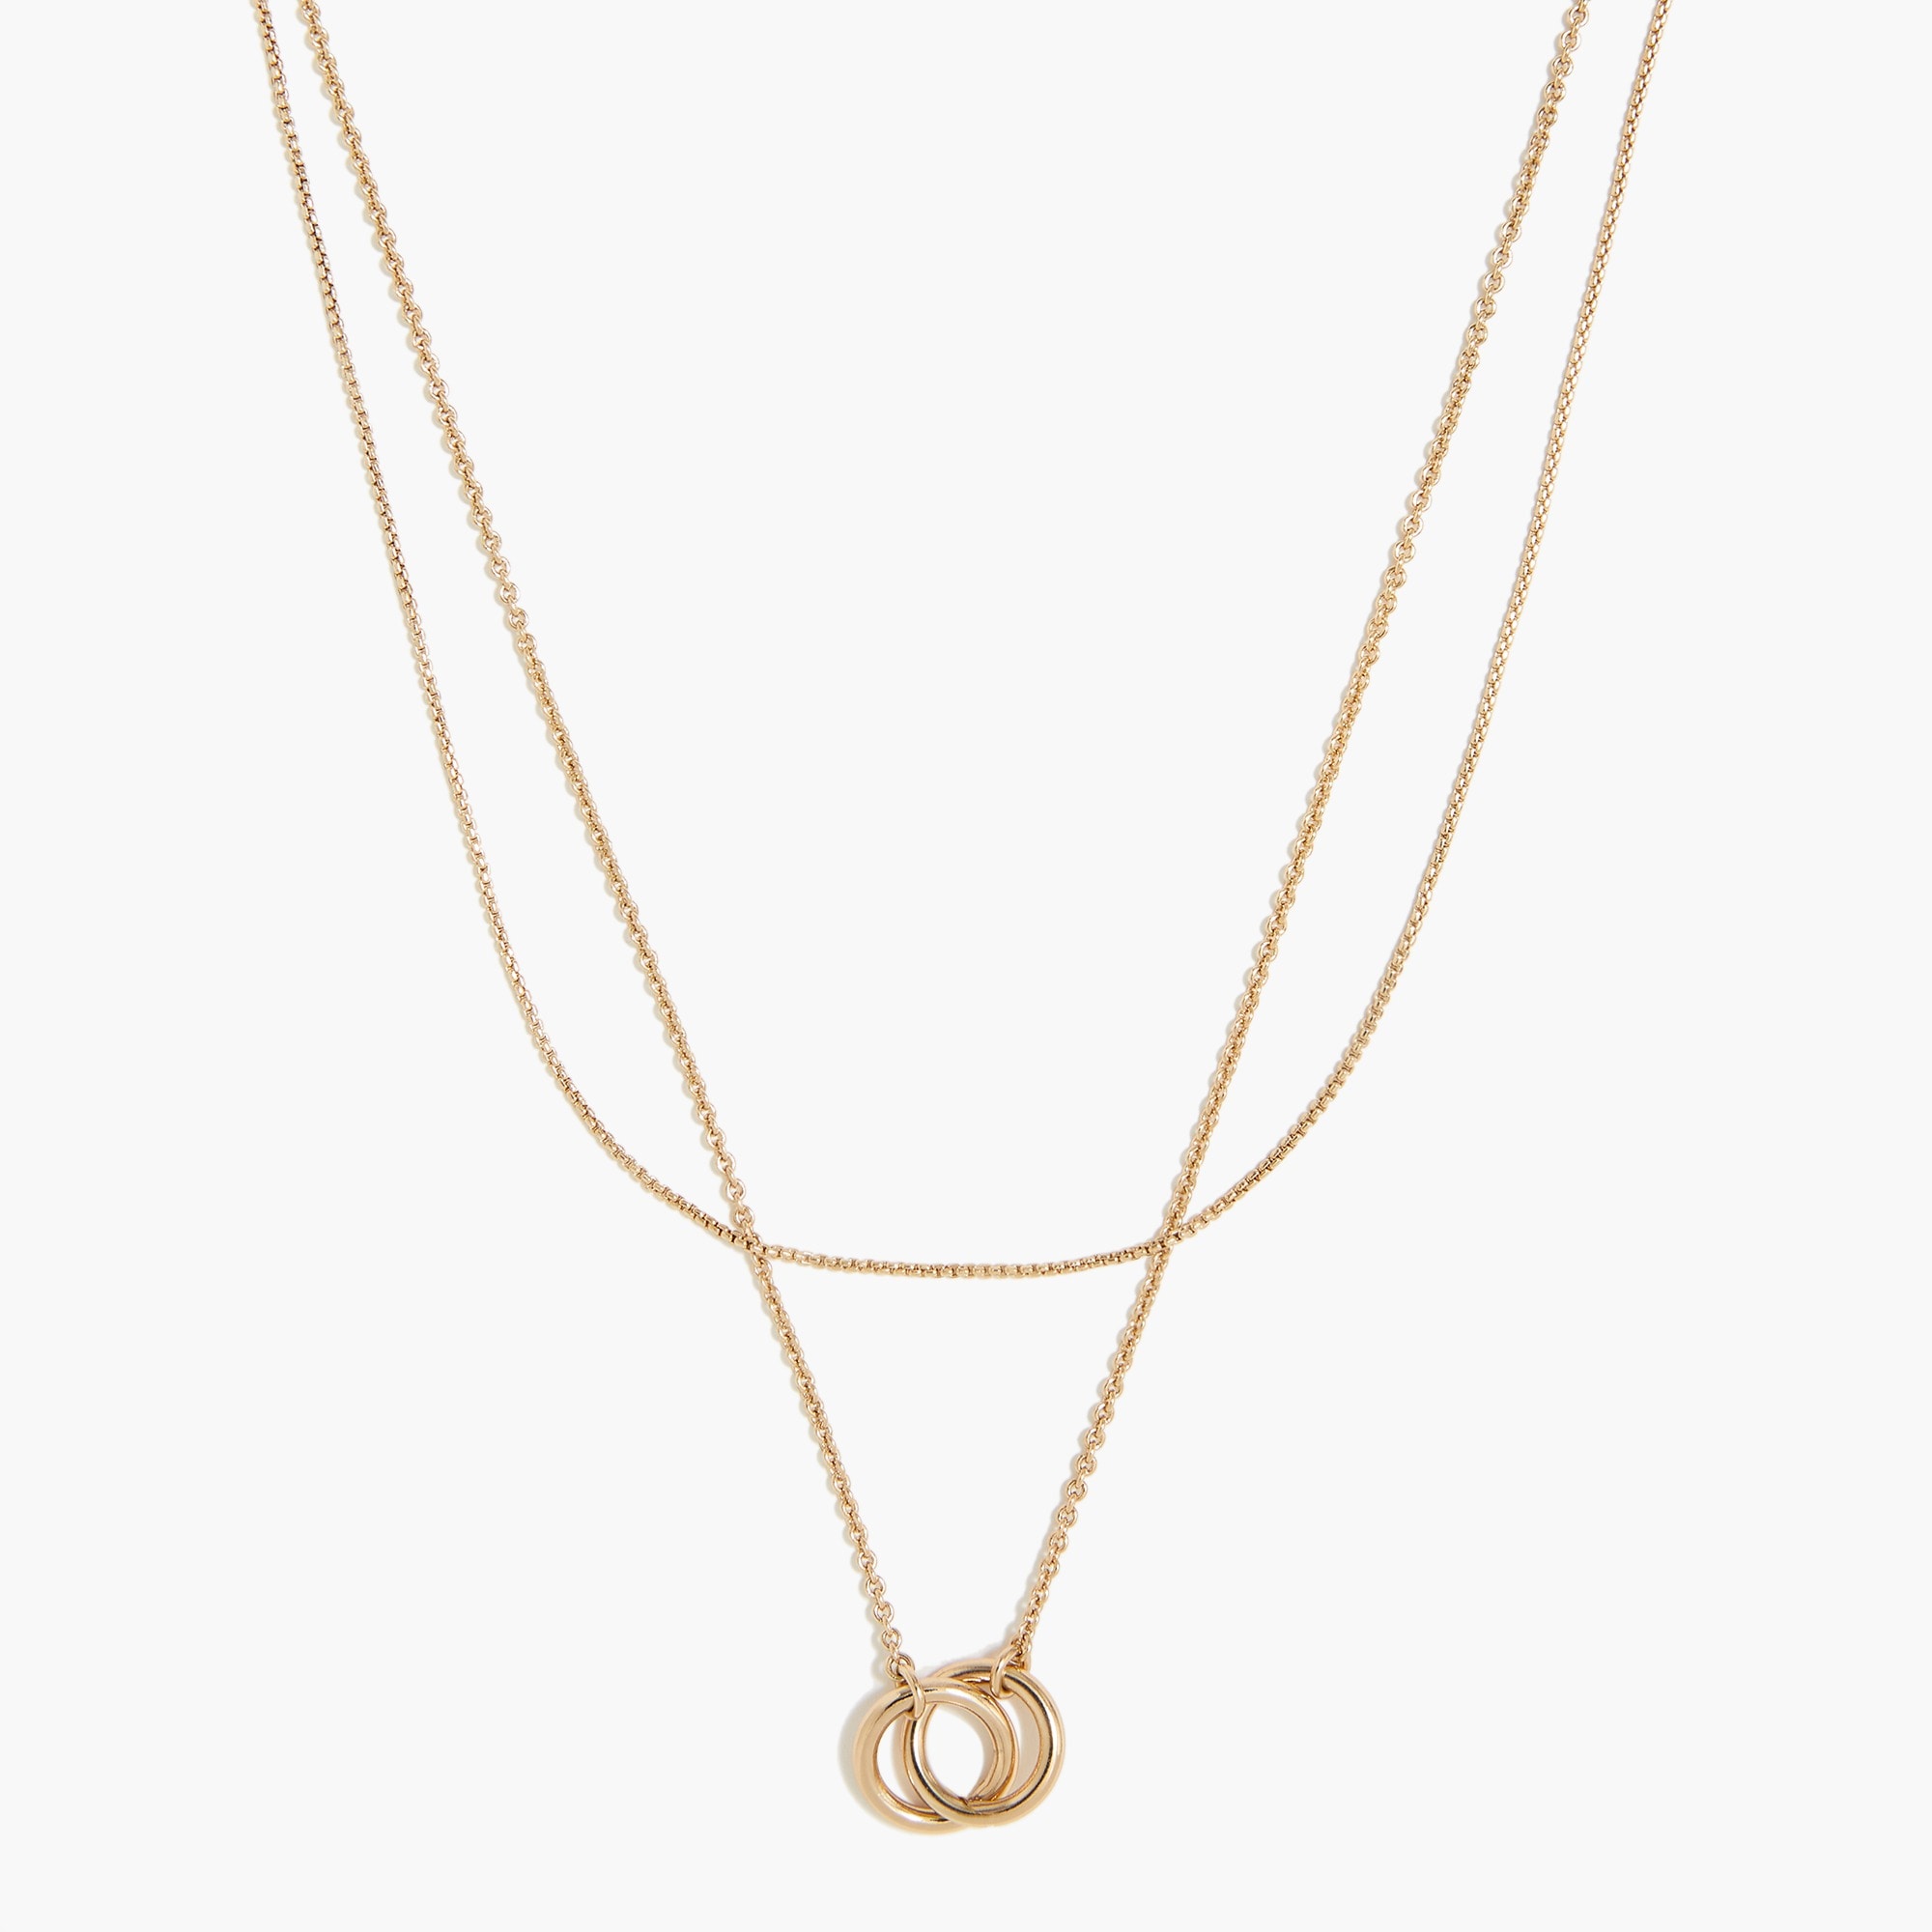 Intertwined layering necklace